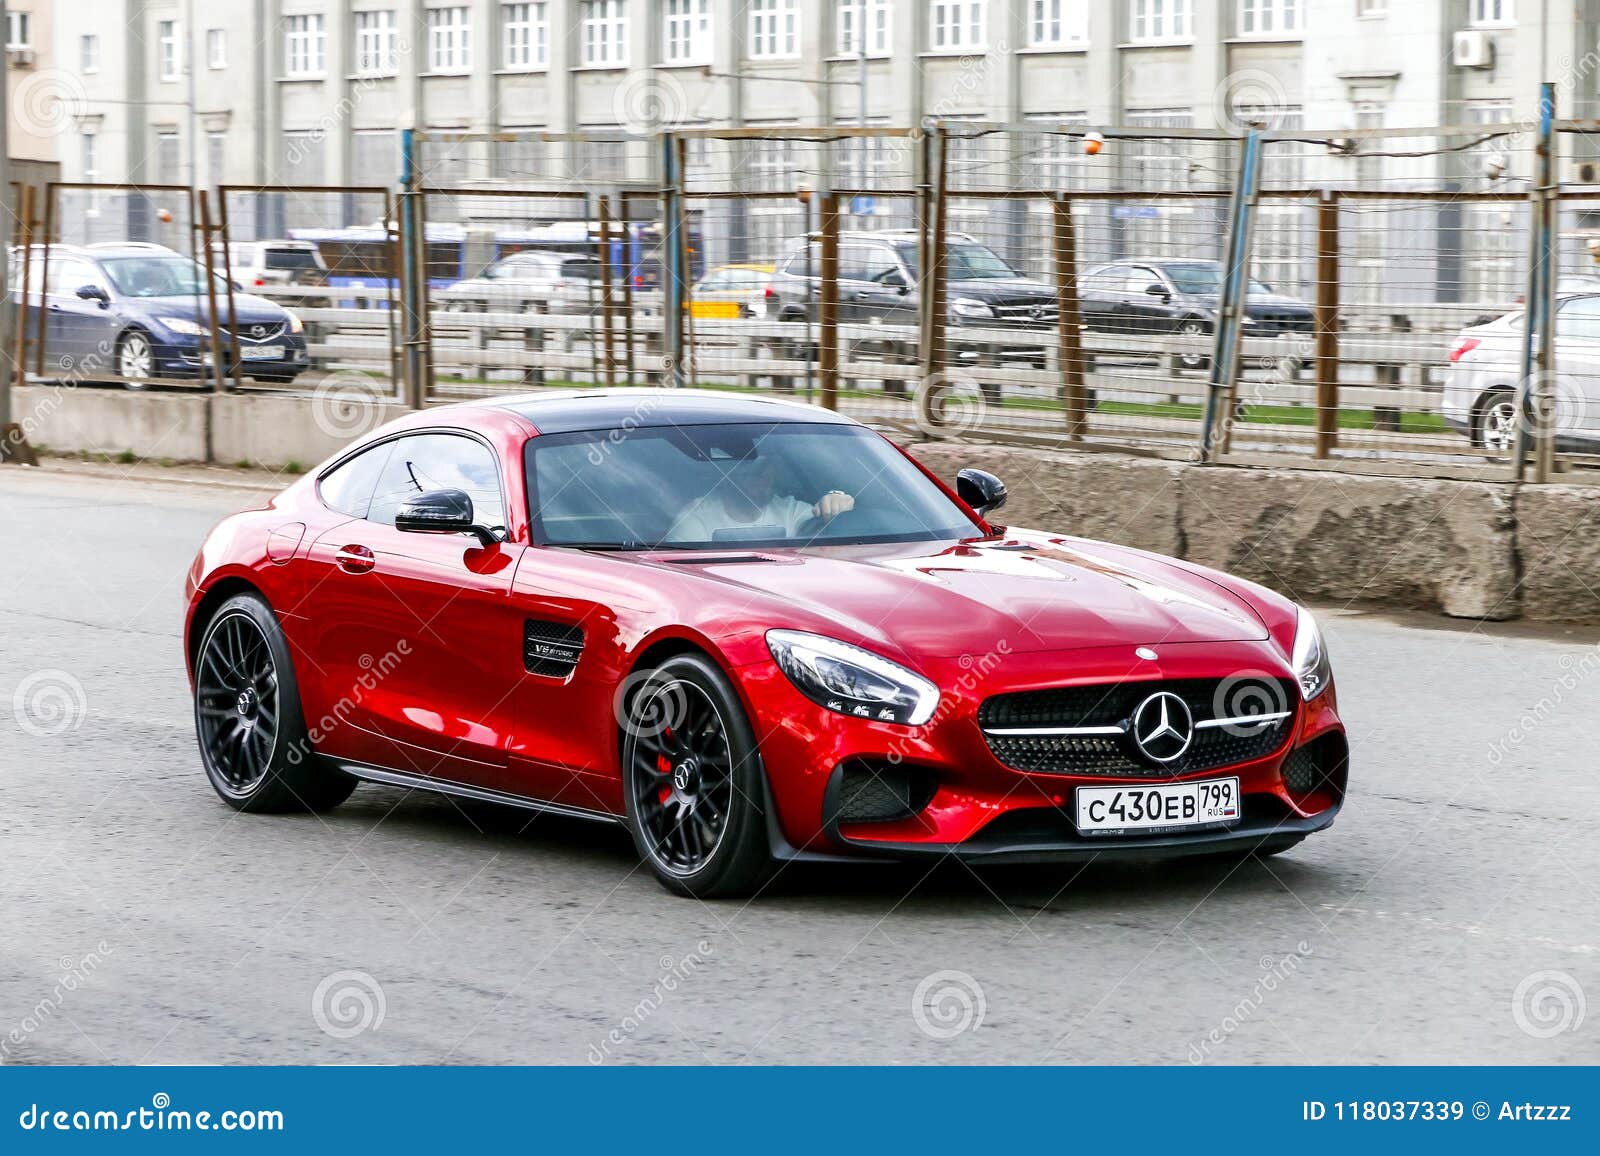 Mercedes-Benz Amg Gt Editorial Stock Image. Image Of Bright - 118037339